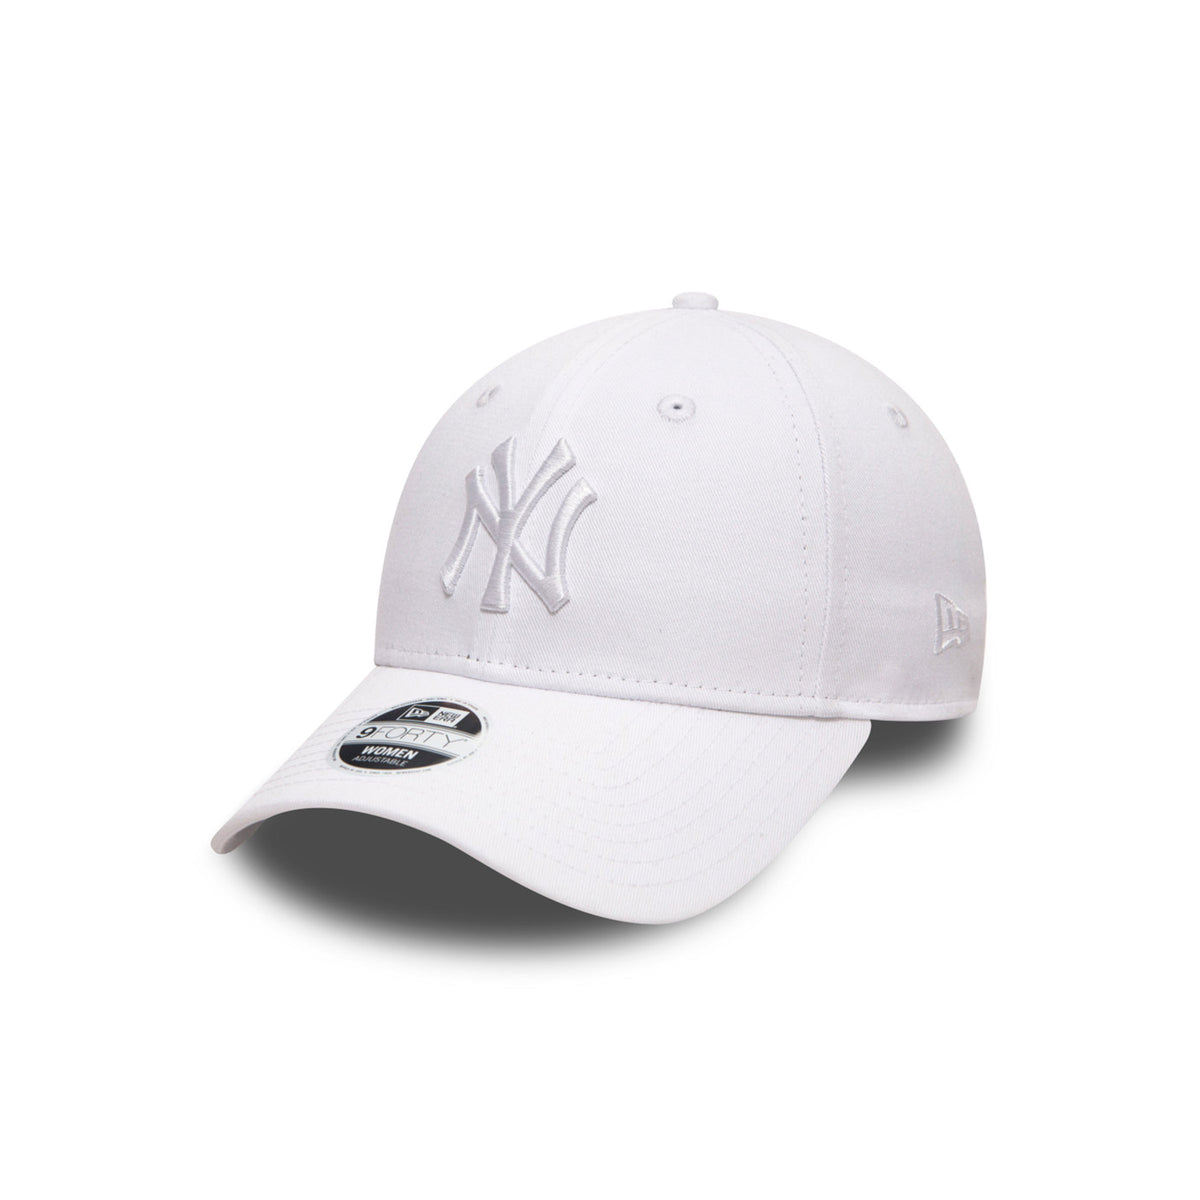 MLB New York Yankees Womens League Essential 9Forty Cap White